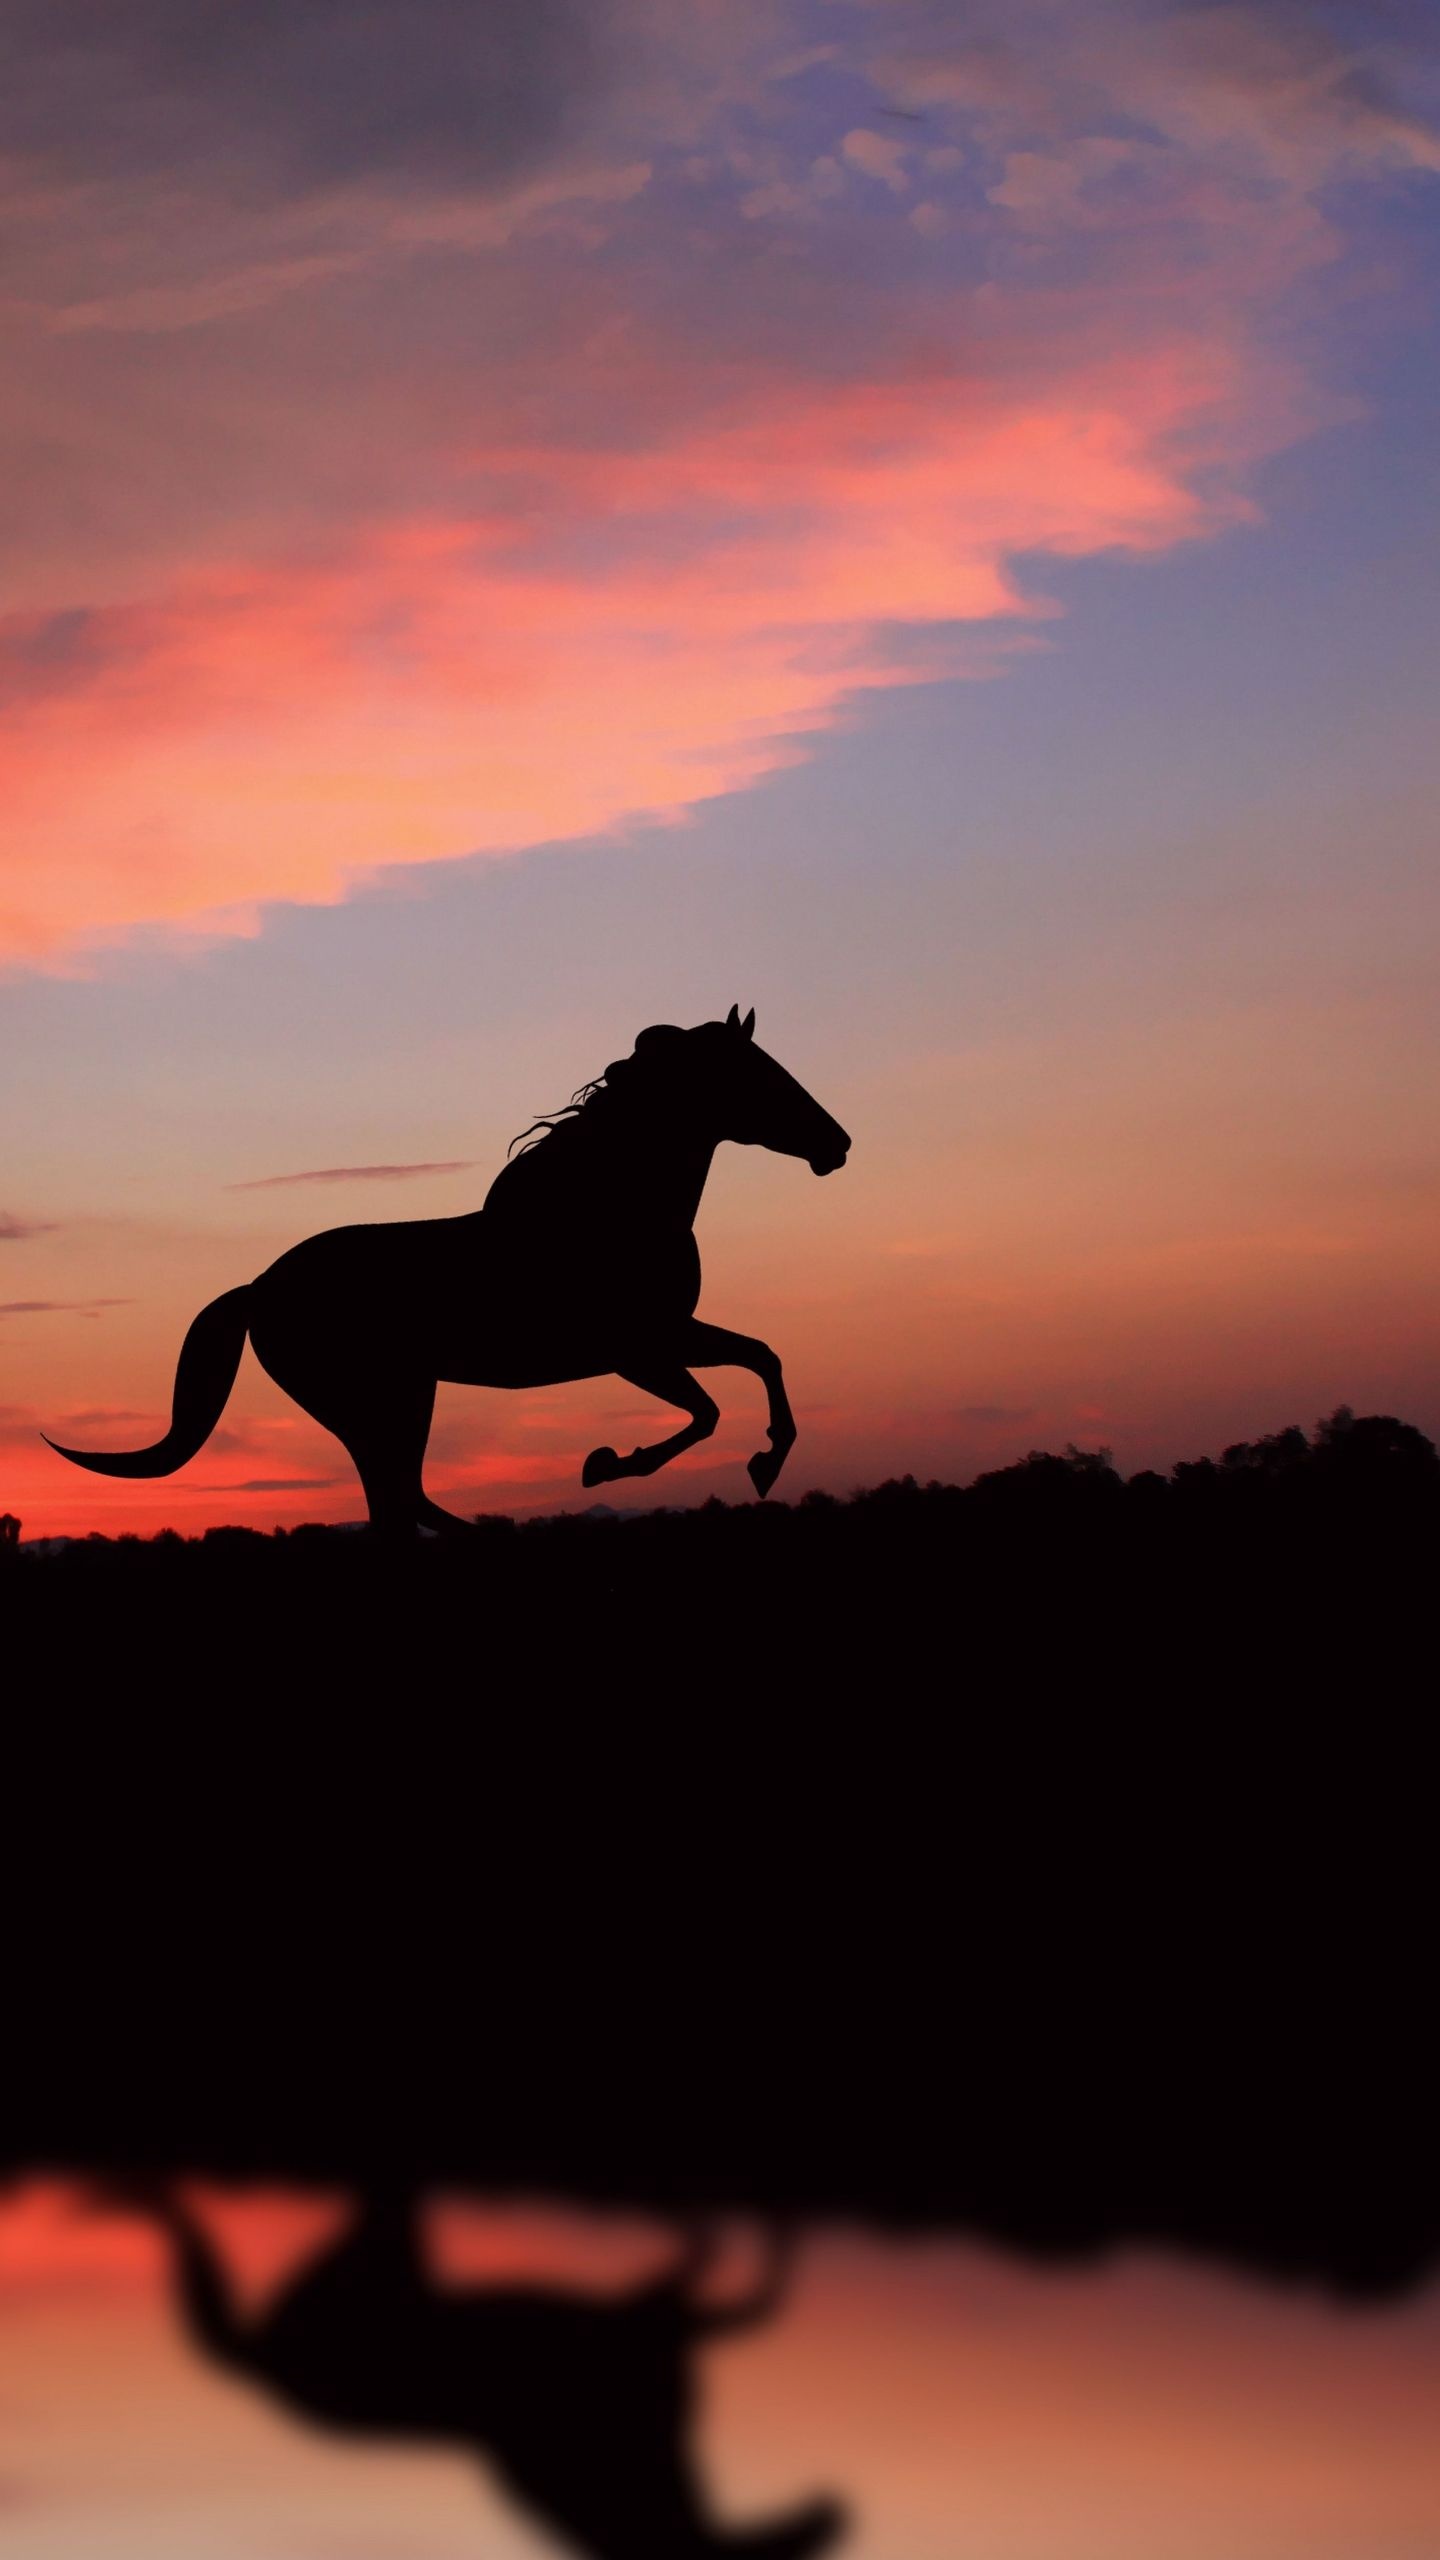 Horse: A large, four-legged animal with hooves, Atmospheric. 1440x2560 HD Wallpaper.